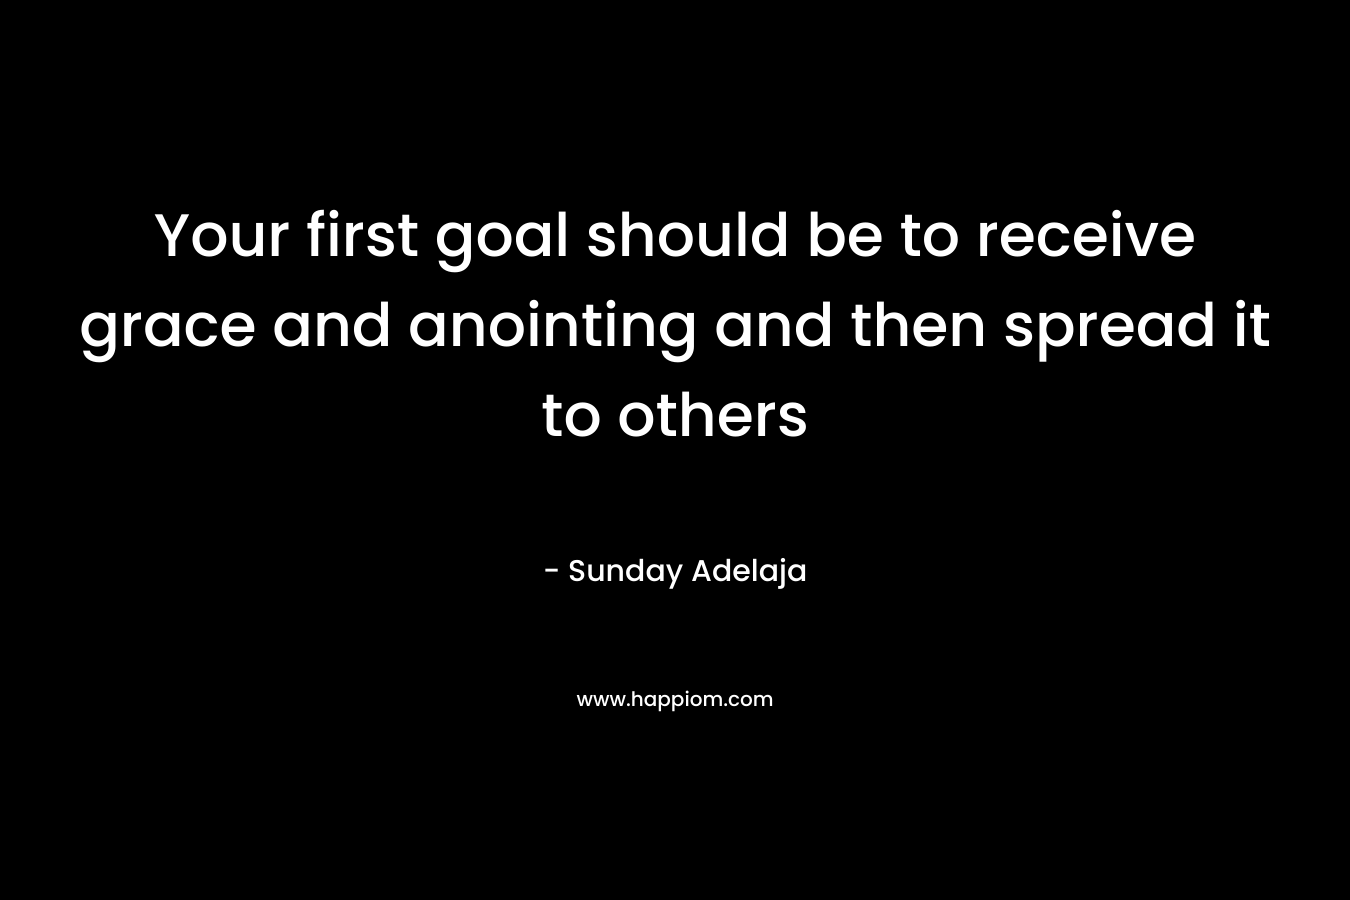 Your first goal should be to receive grace and anointing and then spread it to others